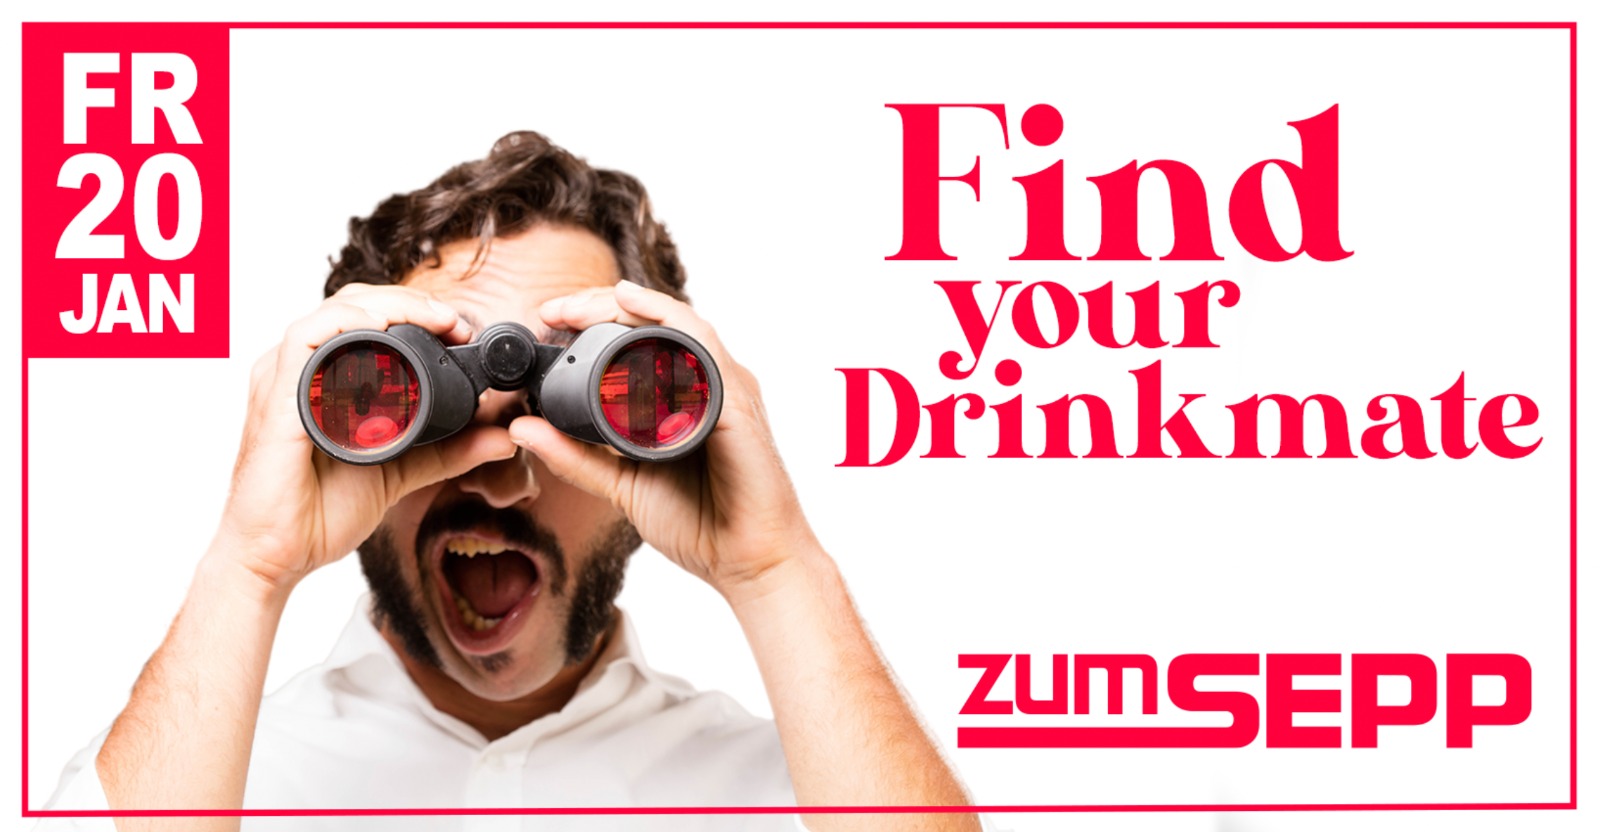 Find Your Drinkmate